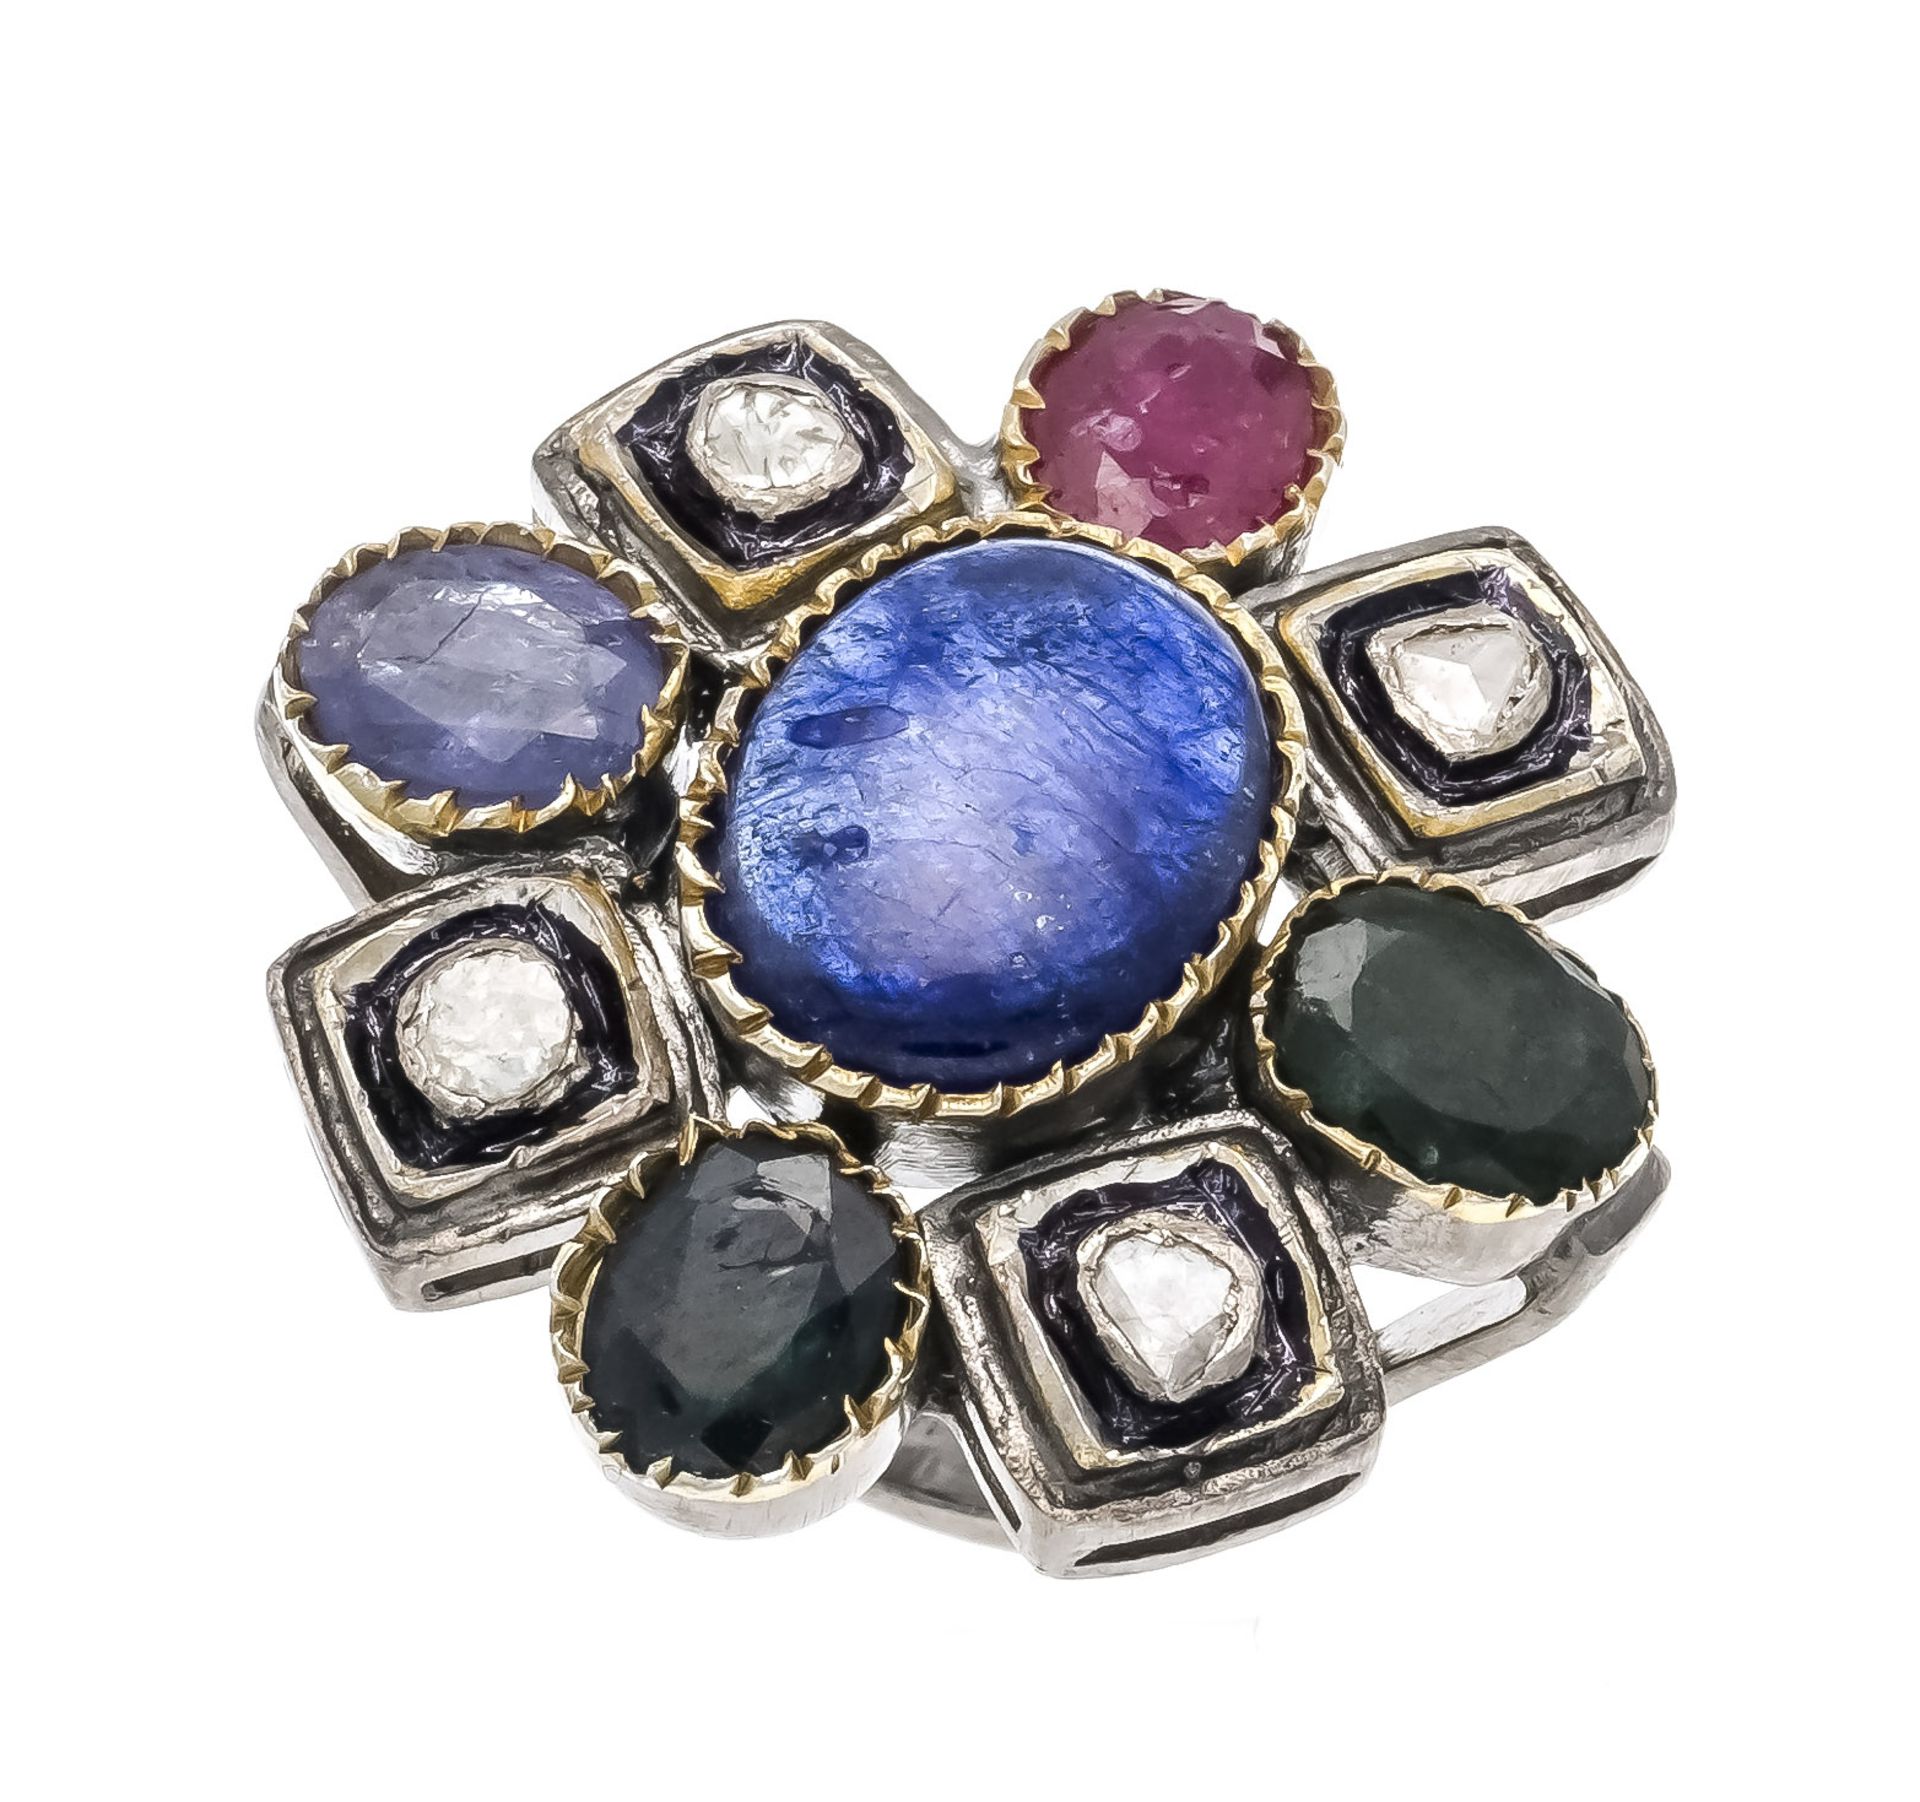 Cocktail ring silver unstamped, partially gold-plated, with genuine colored stones 2 sapphires, 1